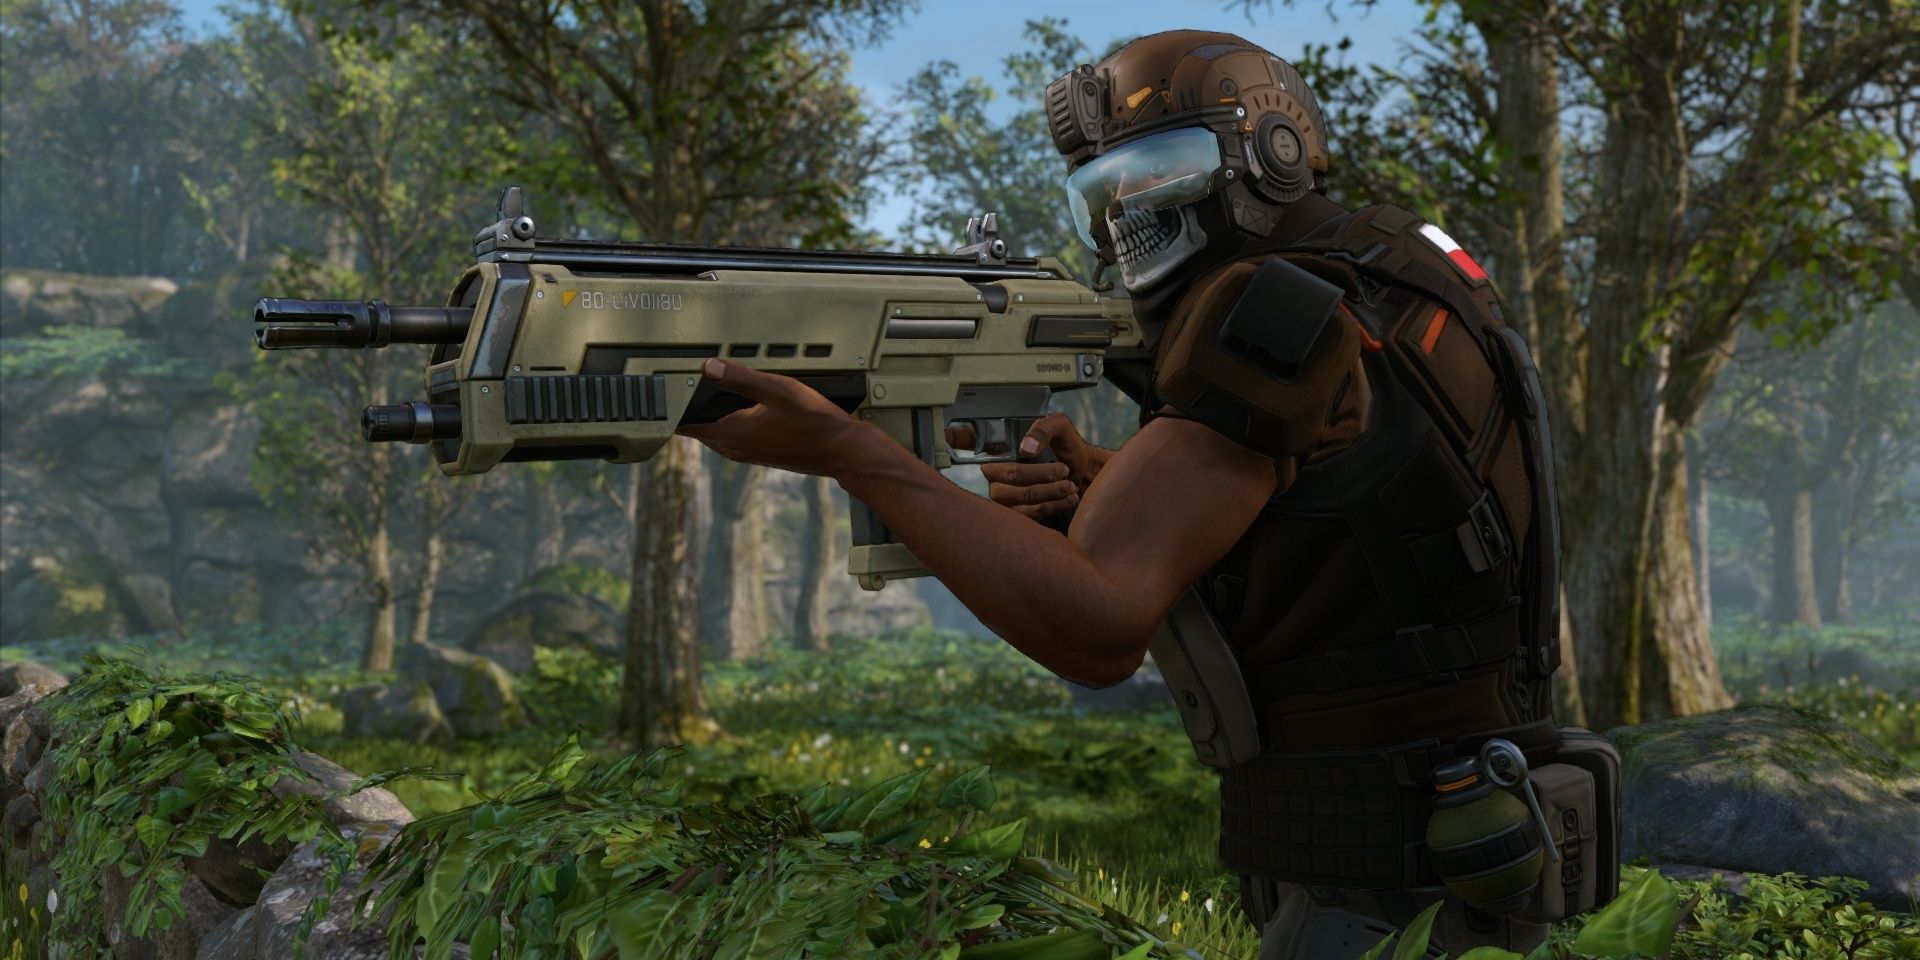 A player holding a large gun wearing a helmet and skull face mask in XCOM 2